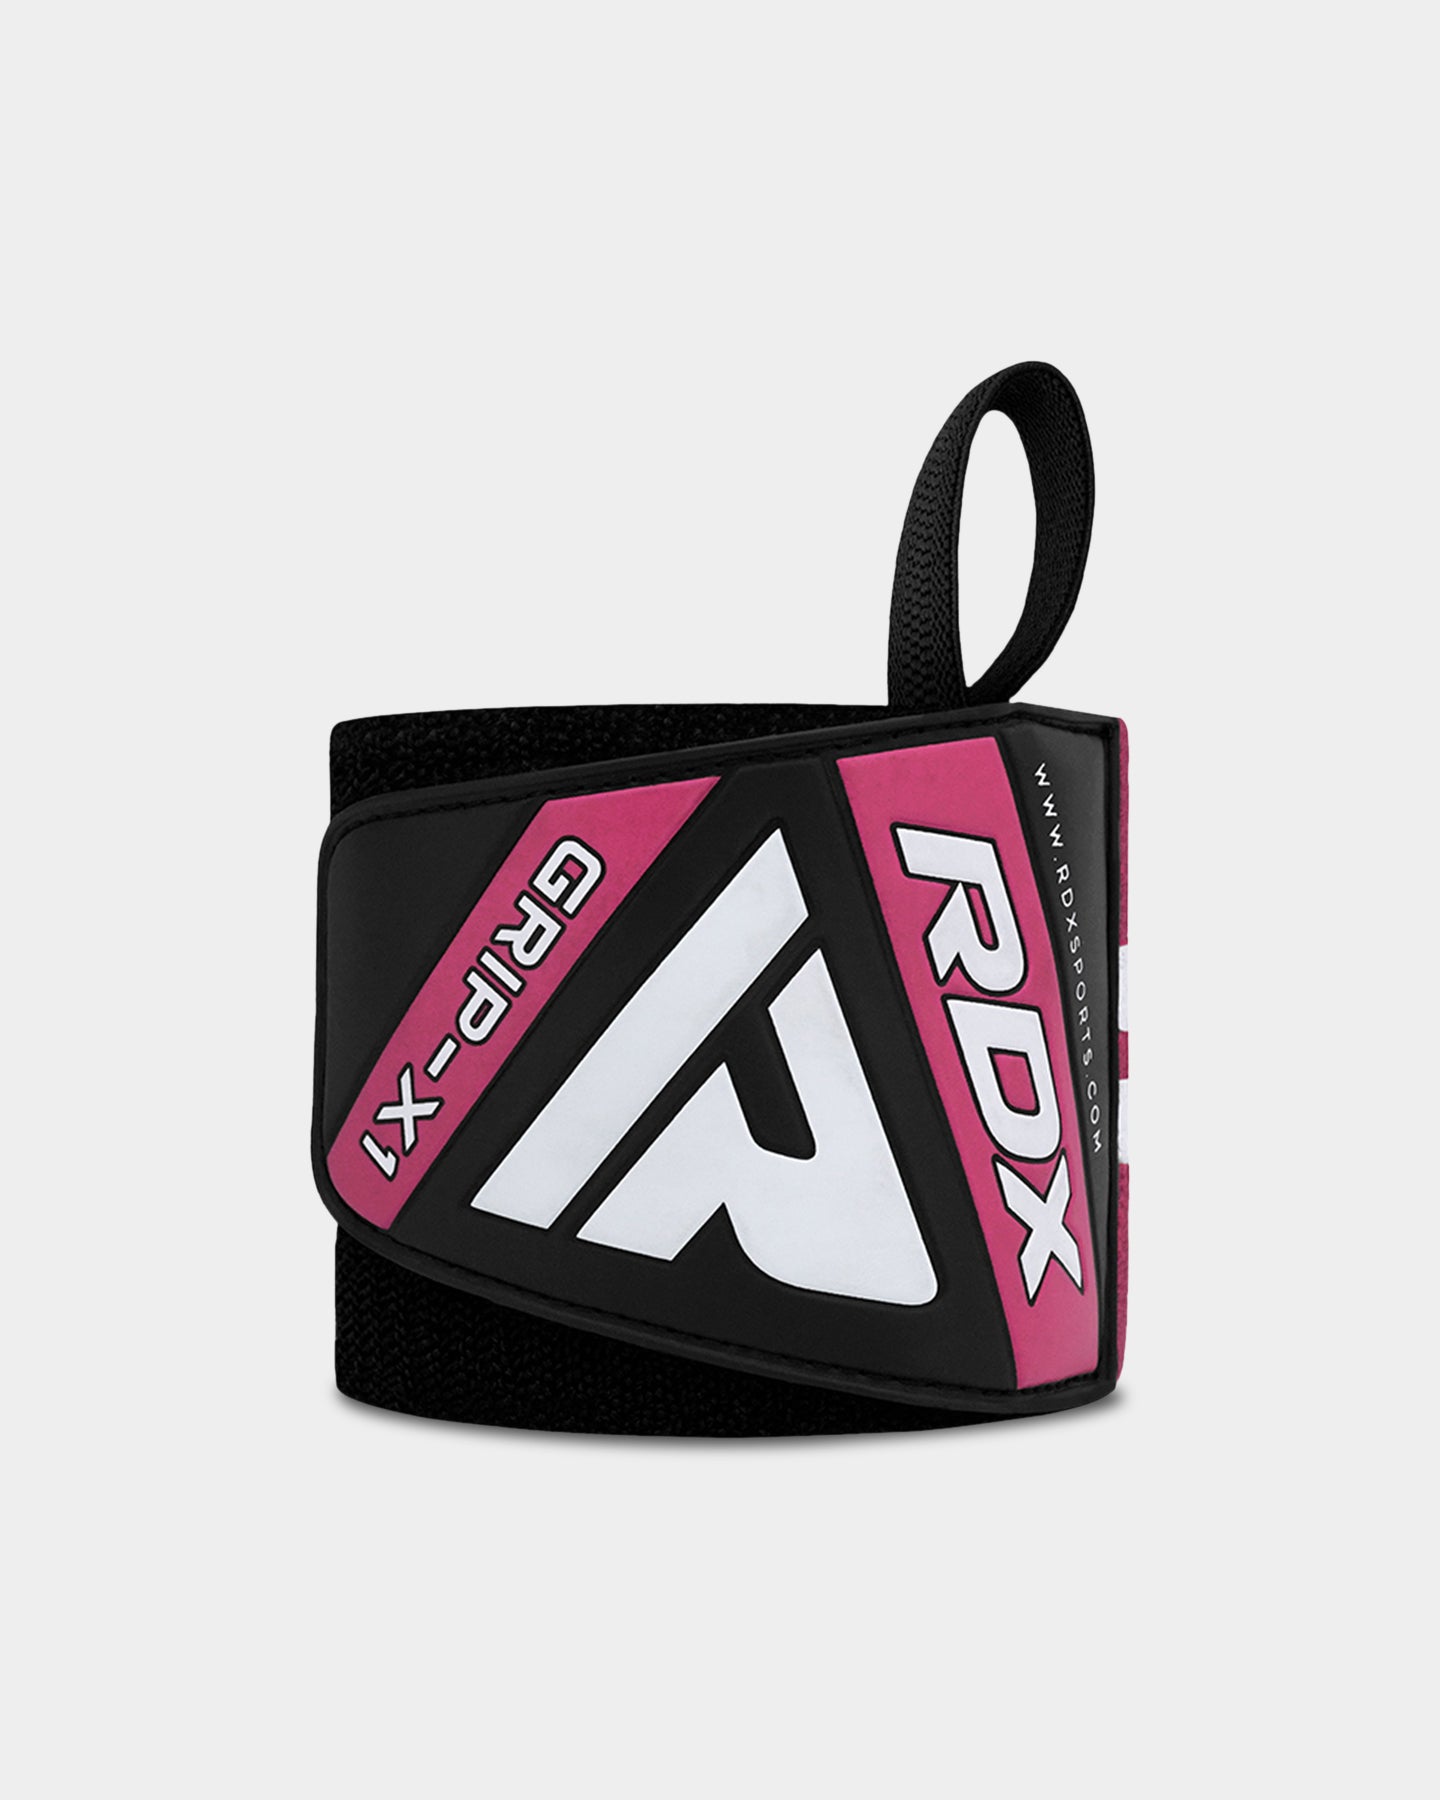 RDX Sports W4 Wrist Support Wraps For Weight Lifting, S - 18", Pink A2